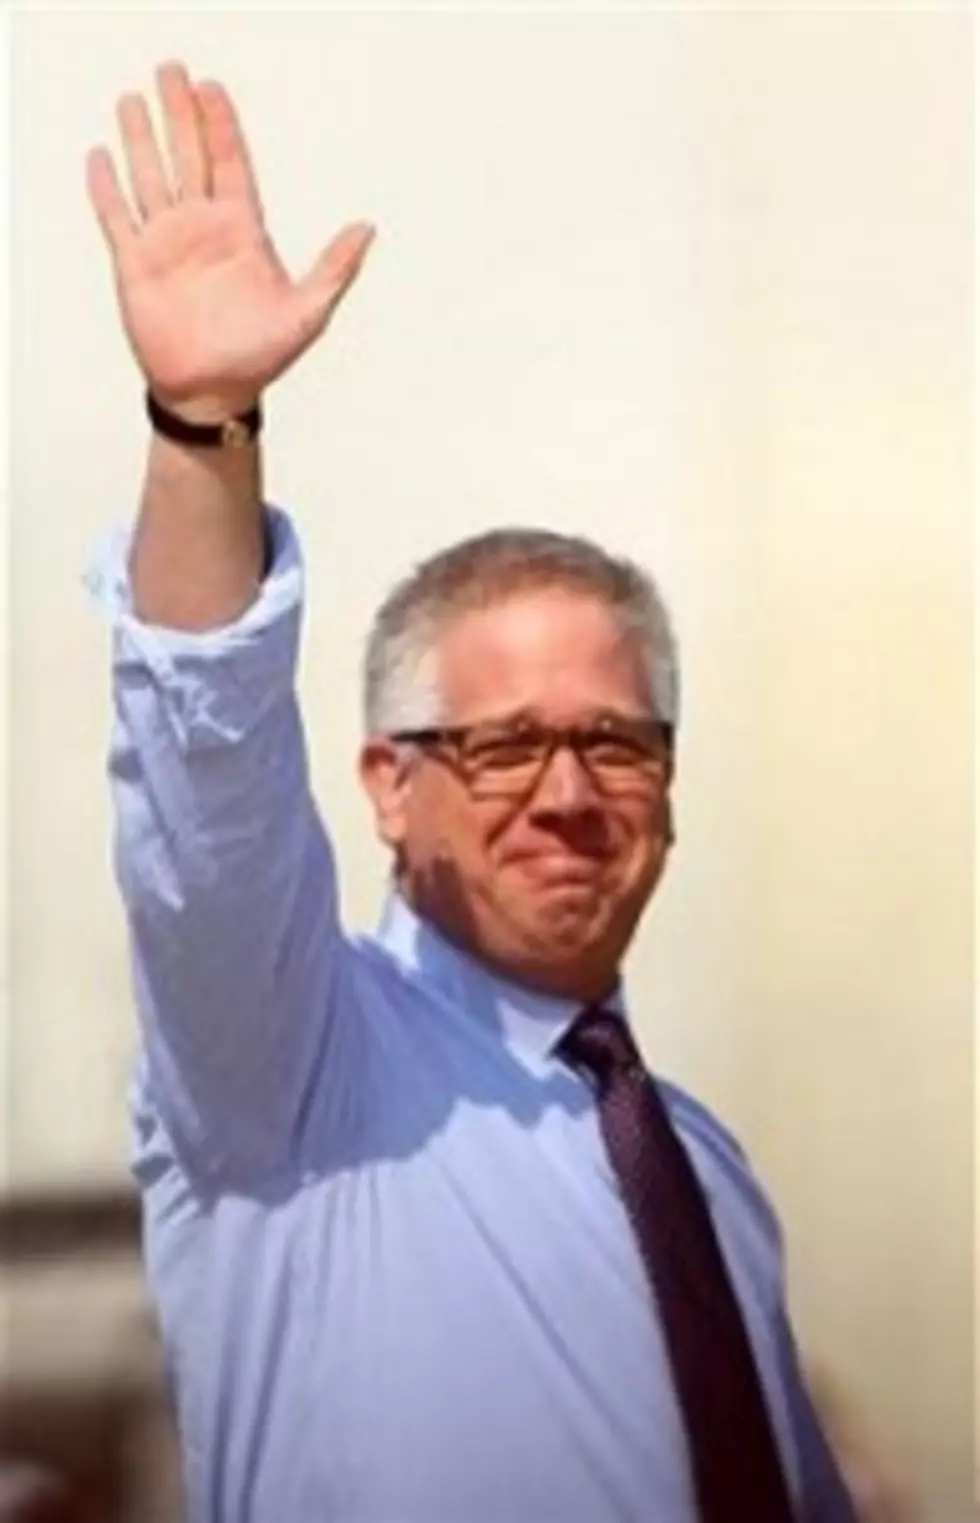 Glenn Beck&#8217;s &#8220;Unelectable&#8221; Simulcast Coming to Tri-Cities &#8211; Win Tickets!